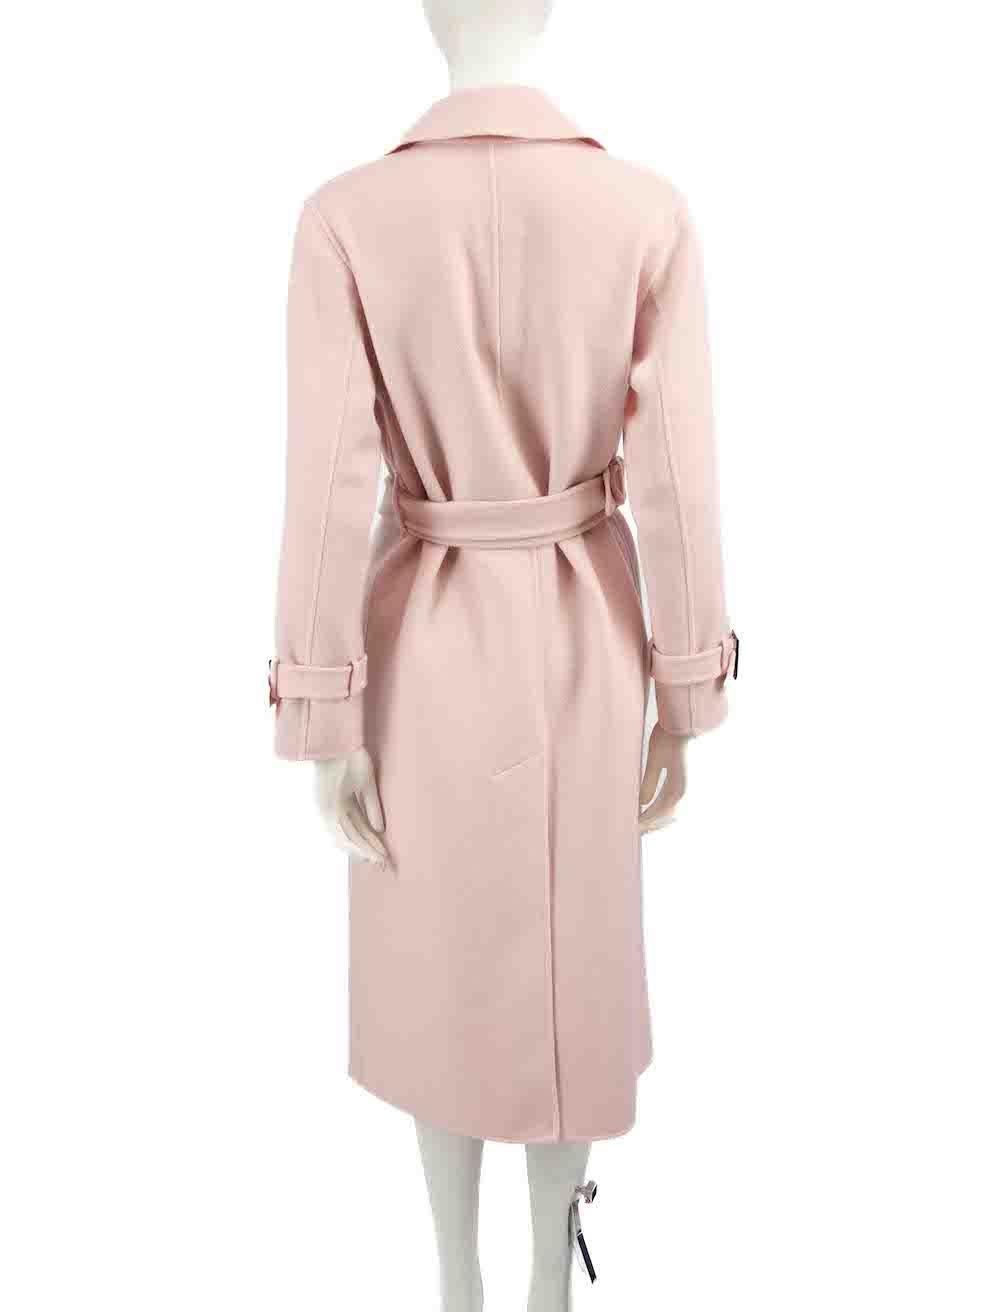 CONDITION is Never worn, with tags. No visible wear to coat is evident on this new Max Mara designer resale item.
 
 
 
 Details
 
 
 Pink
 
 Wool
 
 Coat
 
 Double breasted
 
 Button up fastening
 
 Belted waist and cuffs
 
 2x Side pockets
 
 
 
